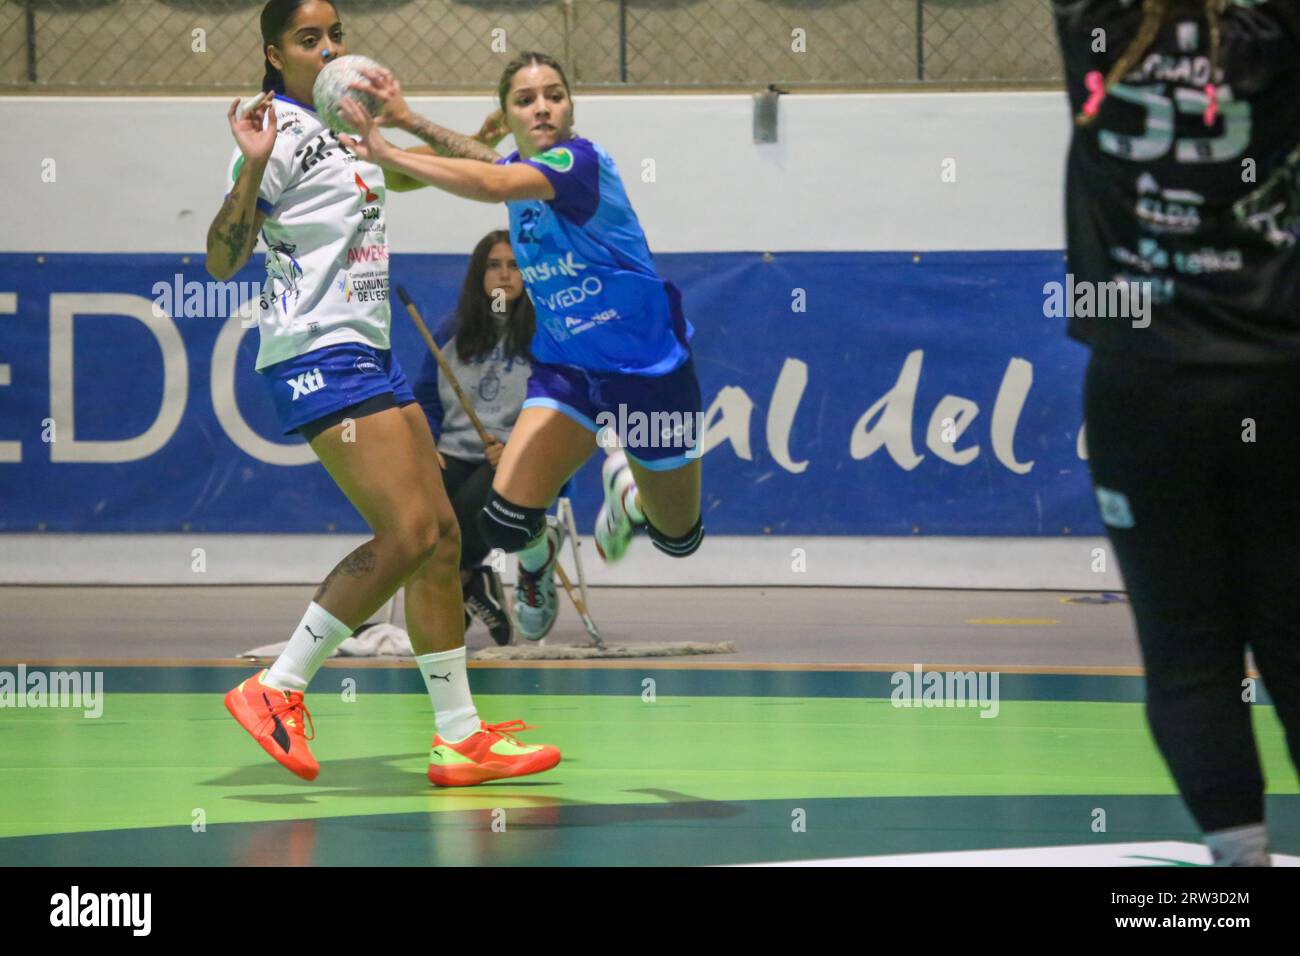 Oviedo, Spain, 16th September, 2023: Lobas Global Atac Oviedo player, Camila Belen (22) shoots on goal during the 3rd Matchday of the Liga Guerreras Iberdrola 2023-24 between Lobas Global Atac Oviedo and Elda Prestigio, on 16 September 2023, at the Florida Arena Municipal Sports Center, in Oviedo, Spain. Credit: Alberto Brevers / Alamy Live News Stock Photo